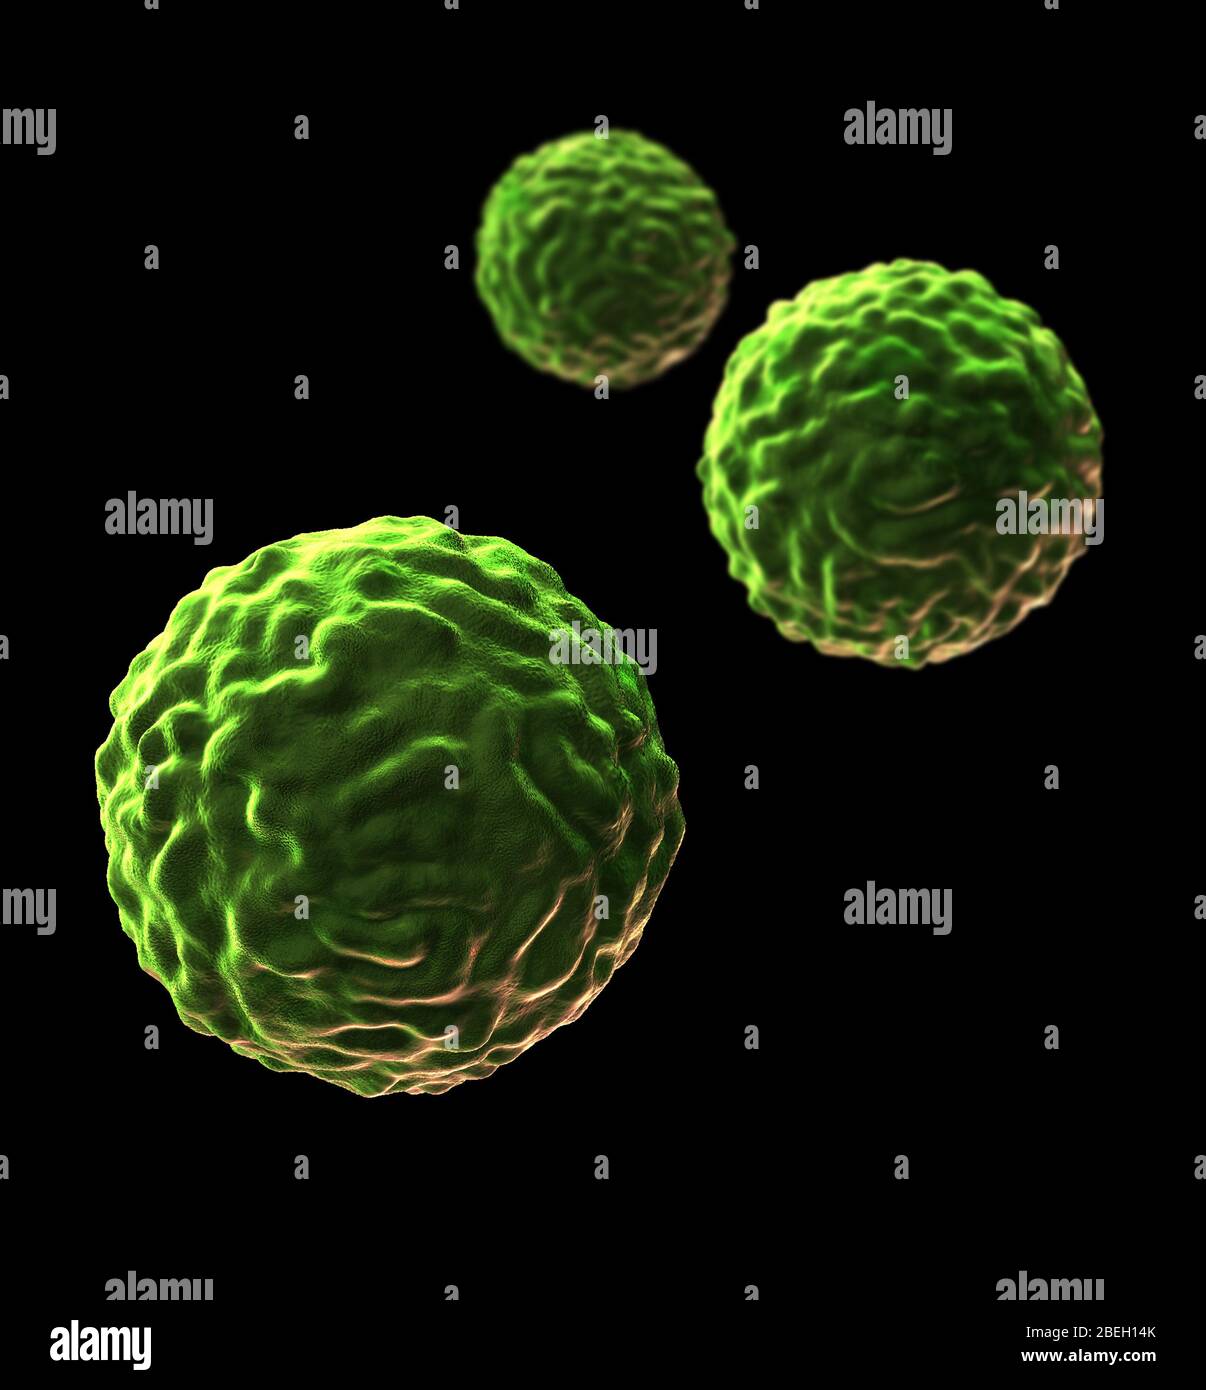 Illustration of stem cells. Stem cells can differentiate into any other cell type. There are three main types of mammalian stem cell: embryonic stem cells, derived from blastocysts; adult stem cells, which are found in some adult tissues; and cord blood stem cells, which are found in the umbilical cord. The type of cell they mature into depends upon the biochemical signals received by the immature cells. Stock Photo